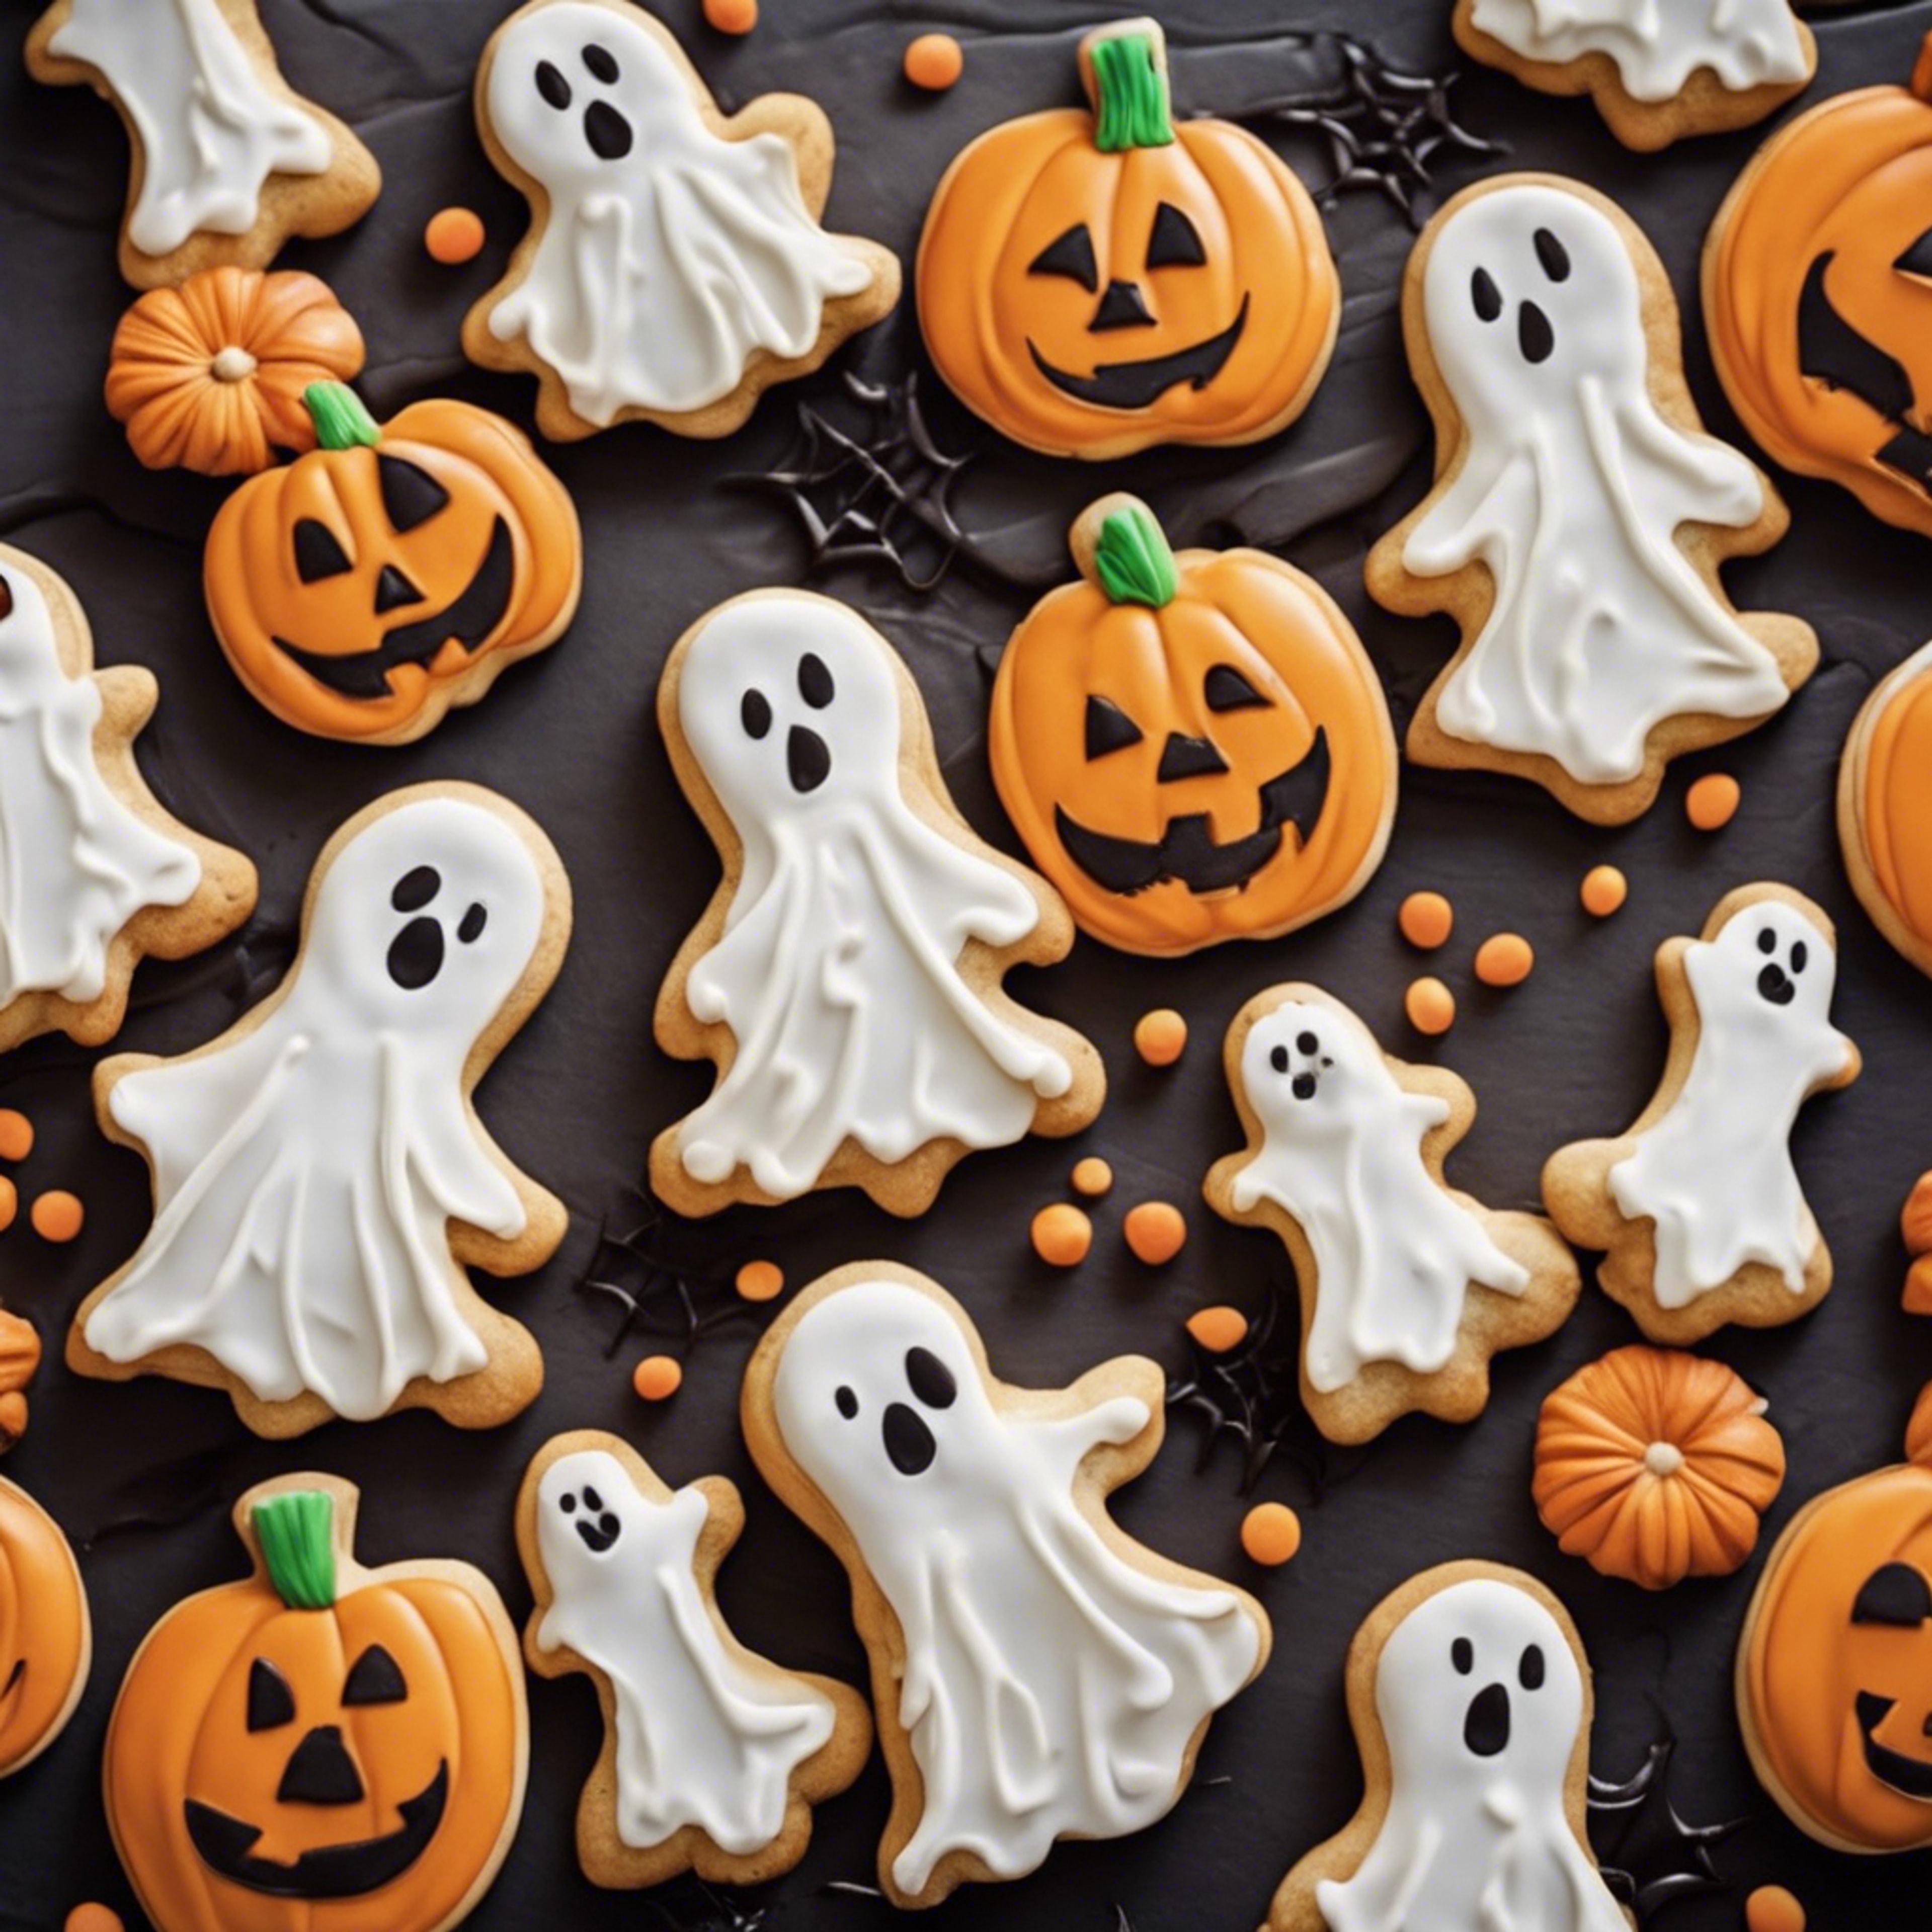 A bakery with a Halloween theme, featuring cookies shaped like ghosts and pumpkins. טפט[da61718461044d51ad06]